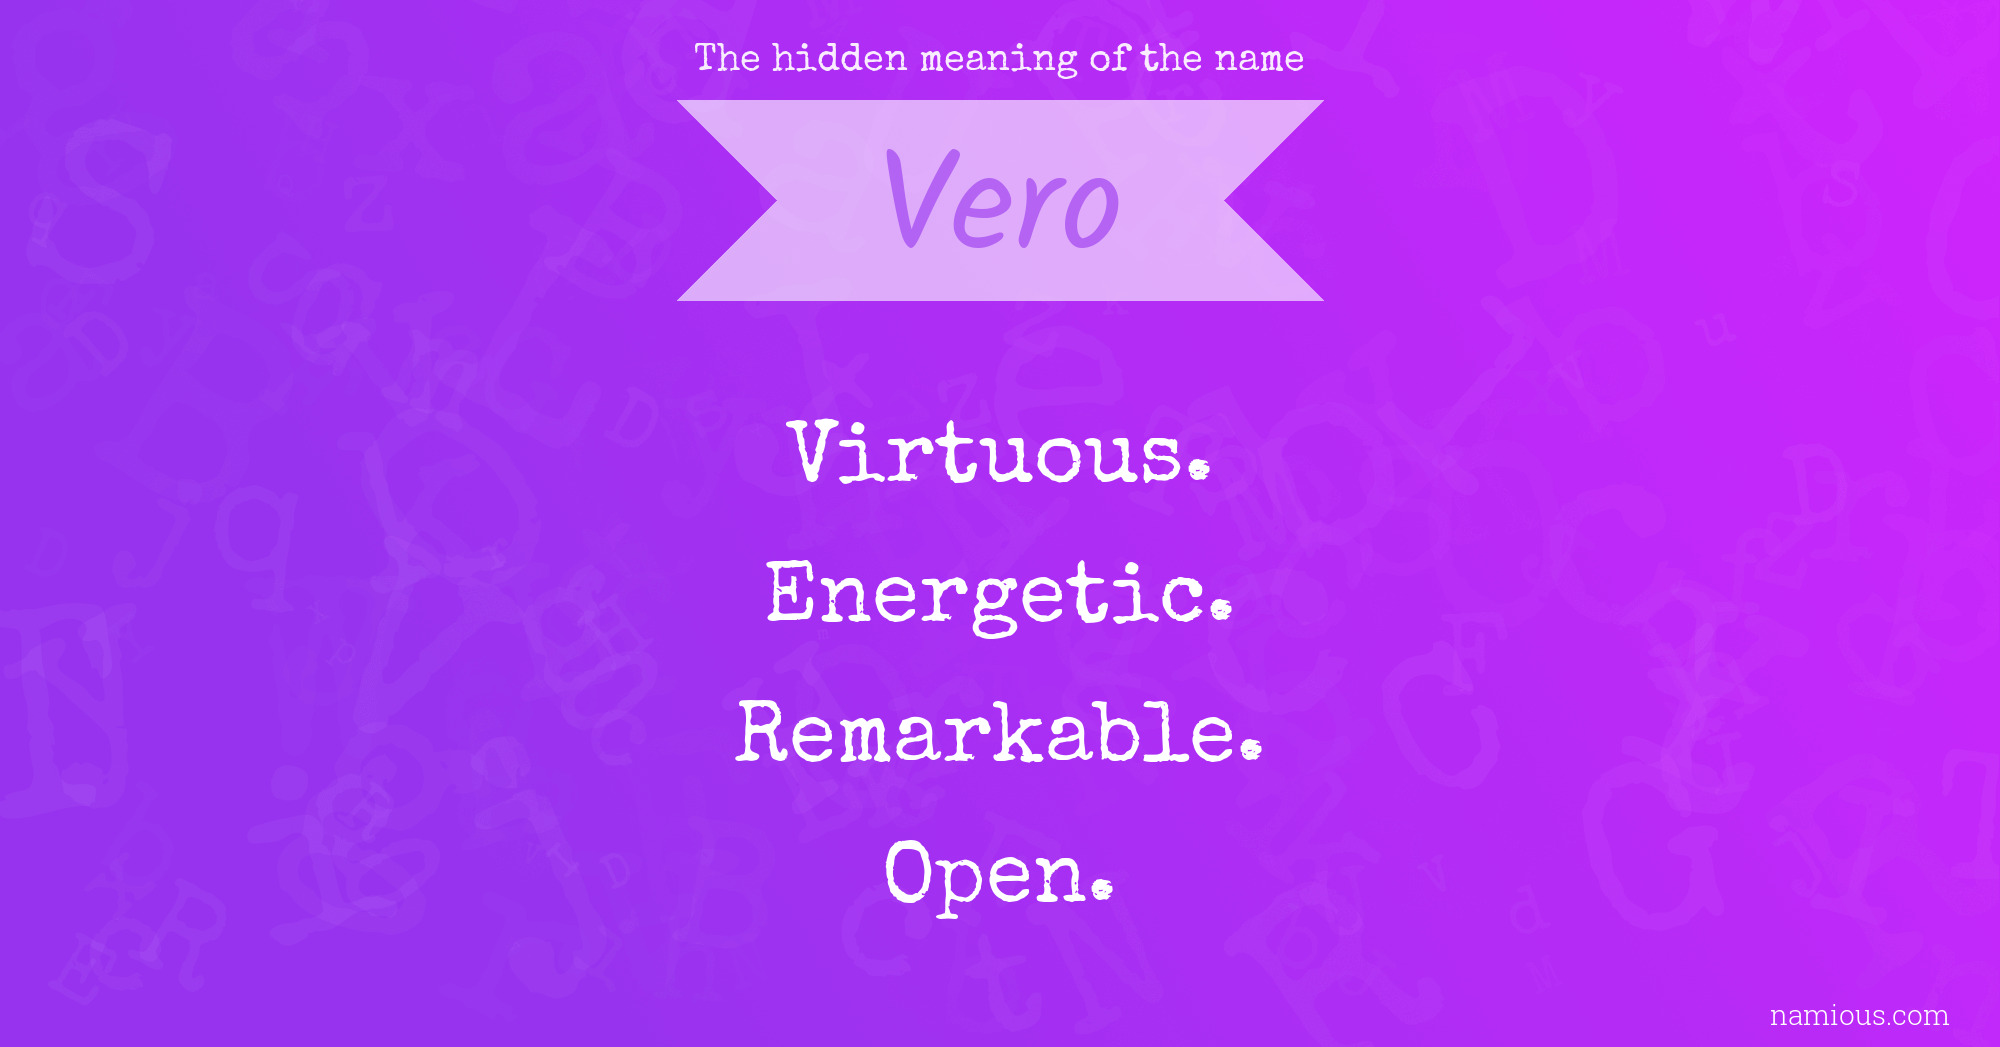 The hidden meaning of the name Vero